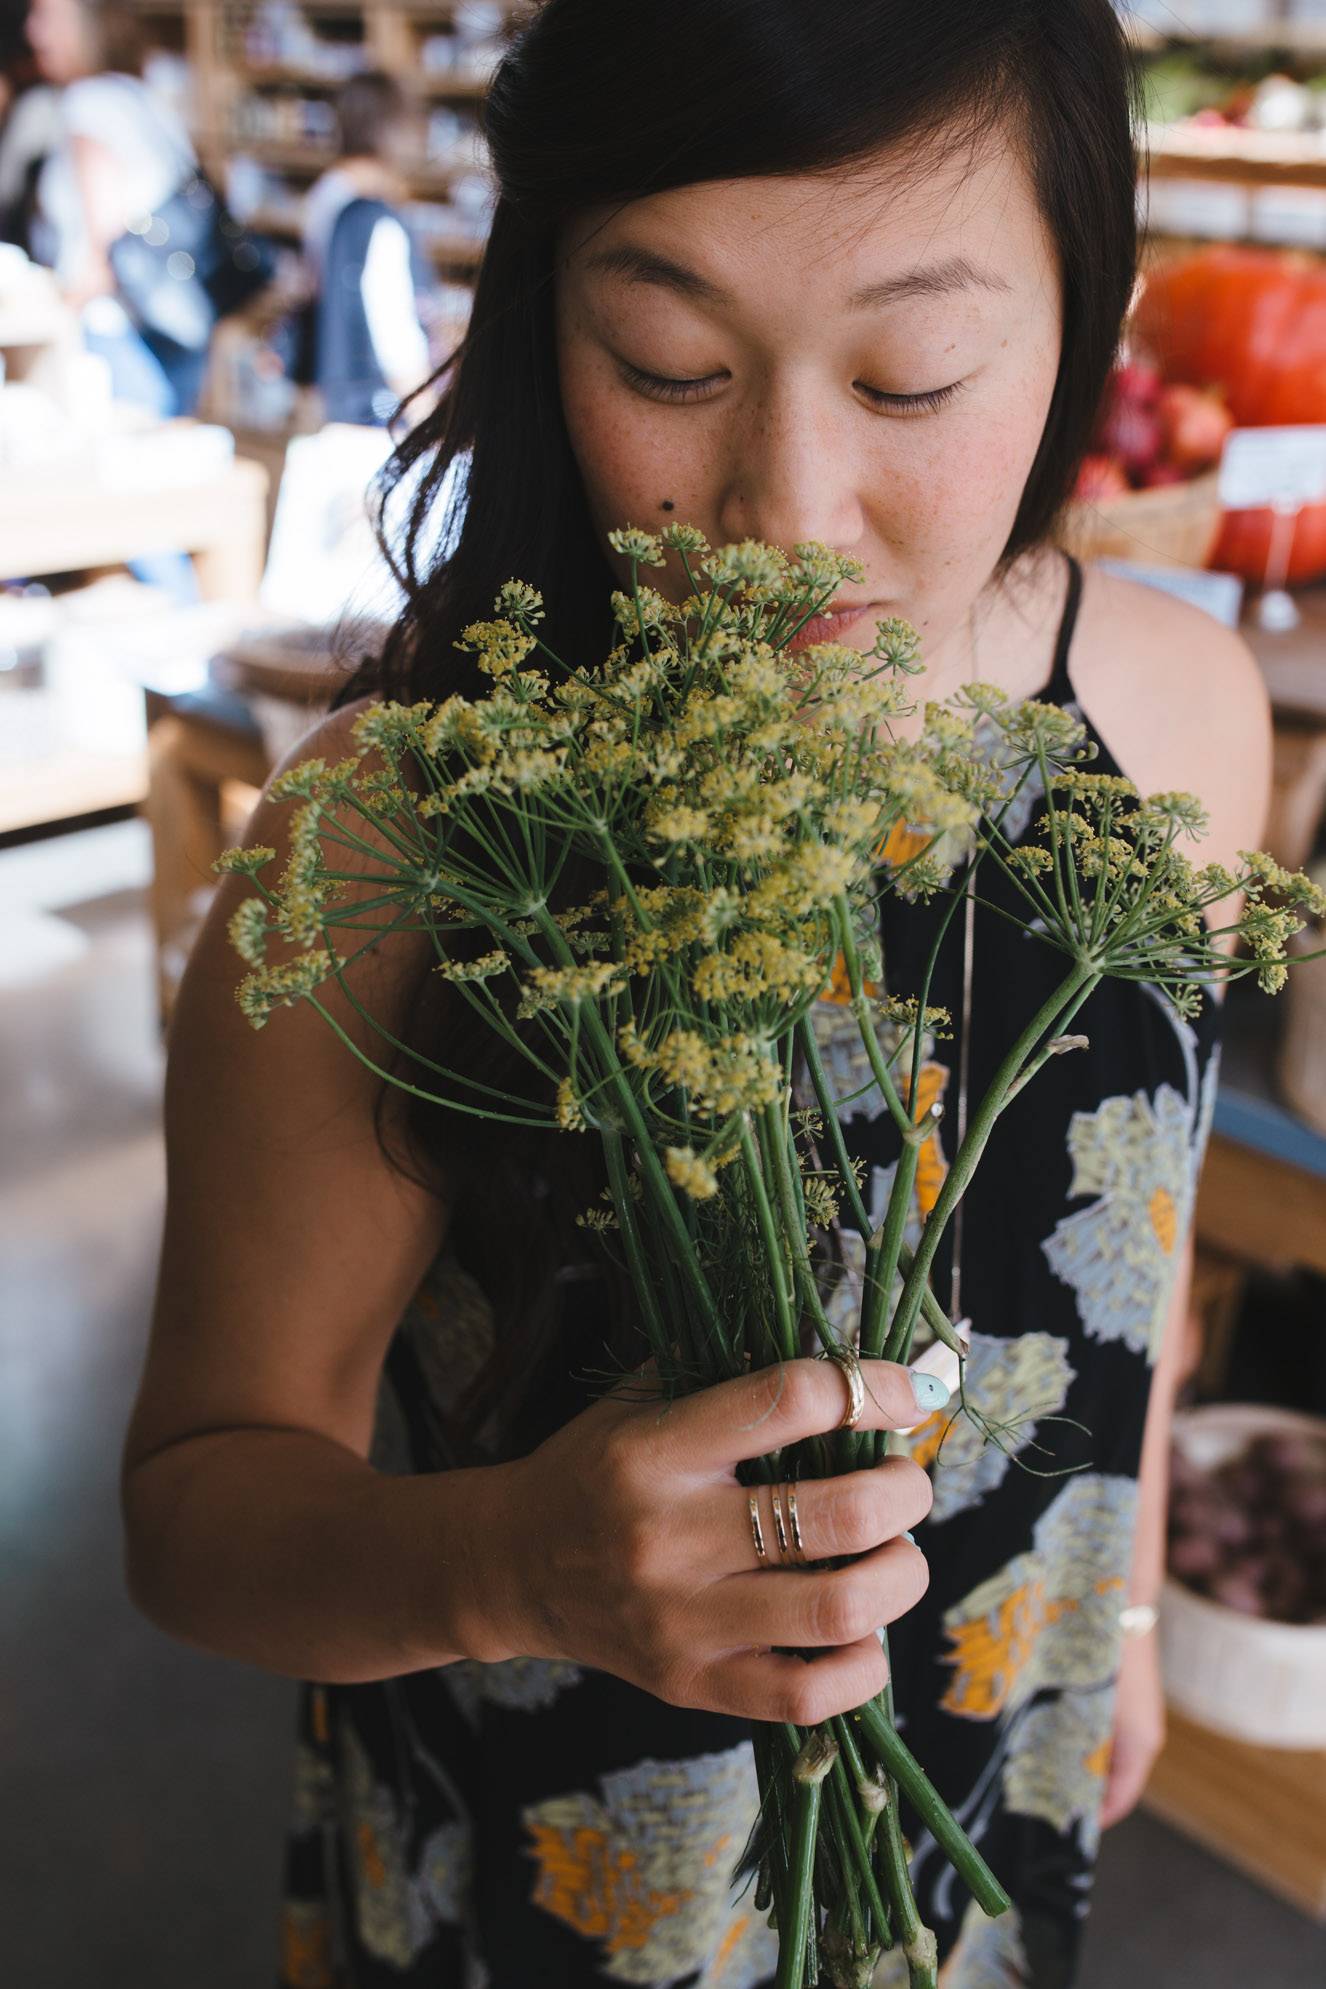 Local Sonoma: Fried Chicken + Flowers at Healdsburg Shed — Local Wanderer